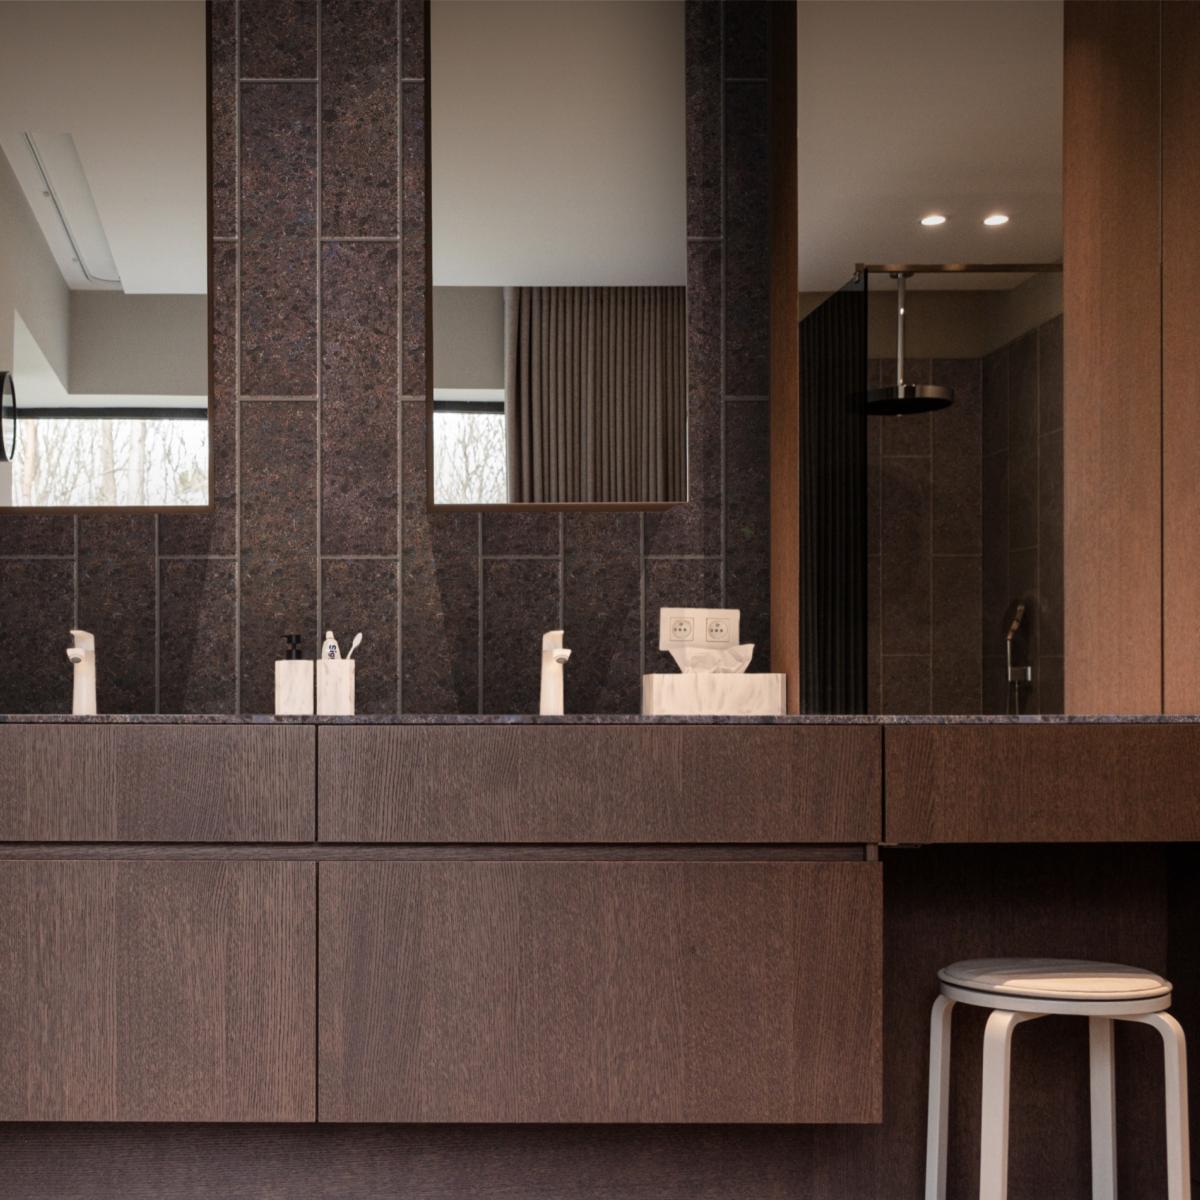 LUNDHS® REAL STONE Tile in Antique® used in bathroom  –  photo courtesy of Morten Rakke for LUNDHS